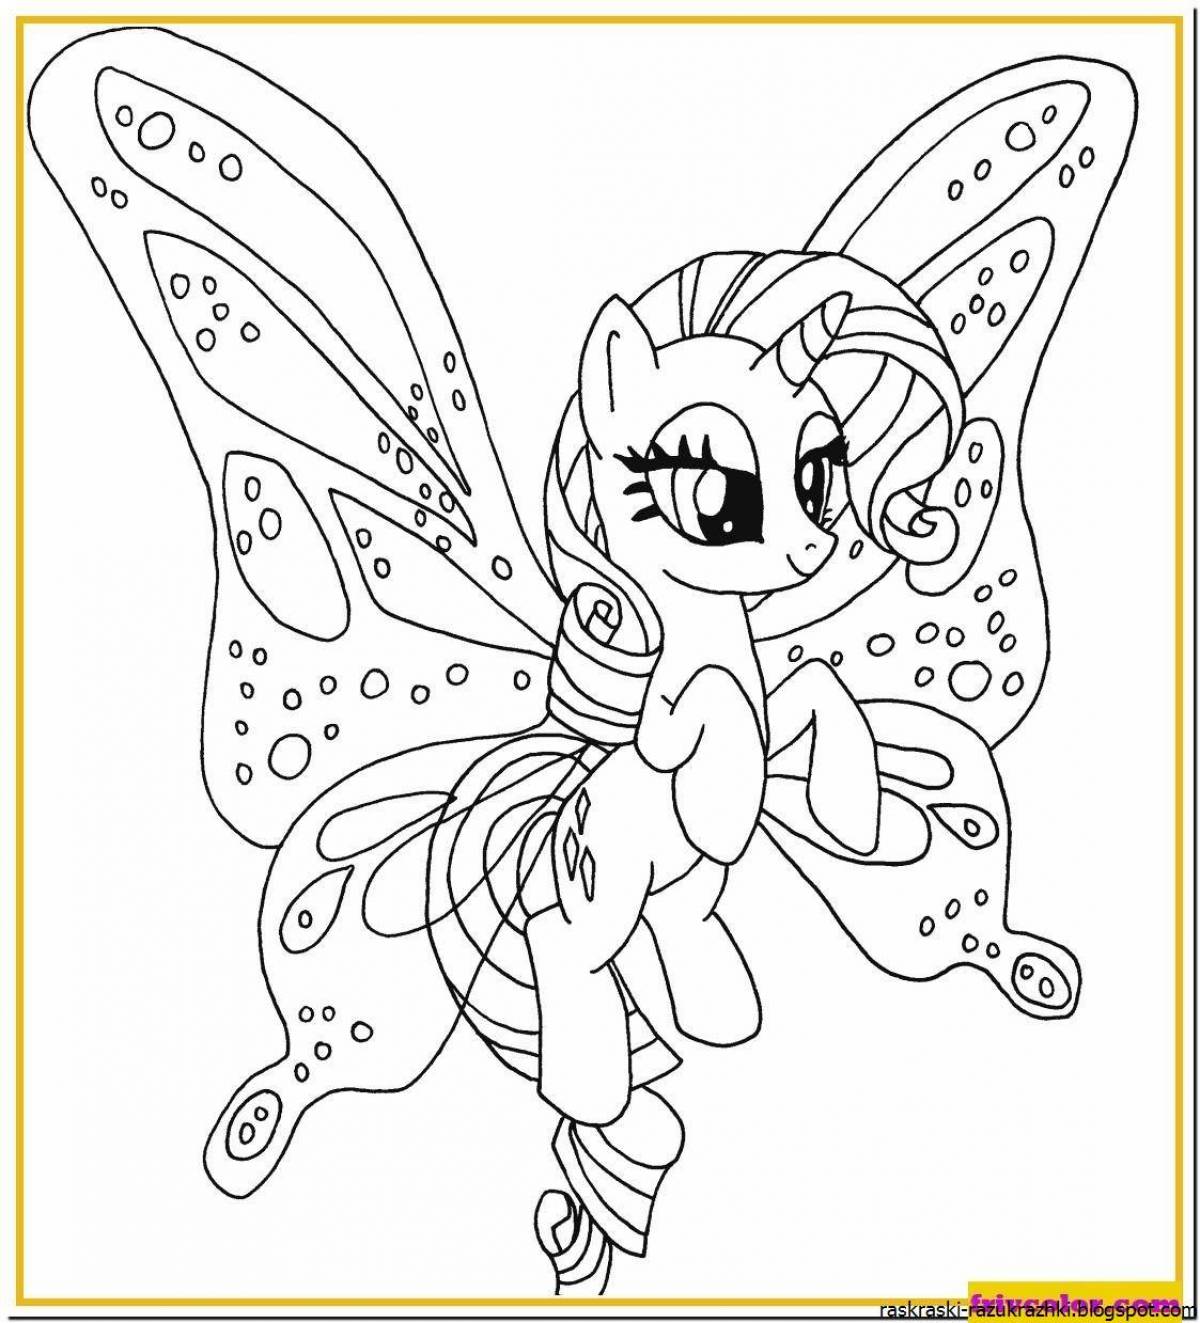 Magic pony coloring for kids